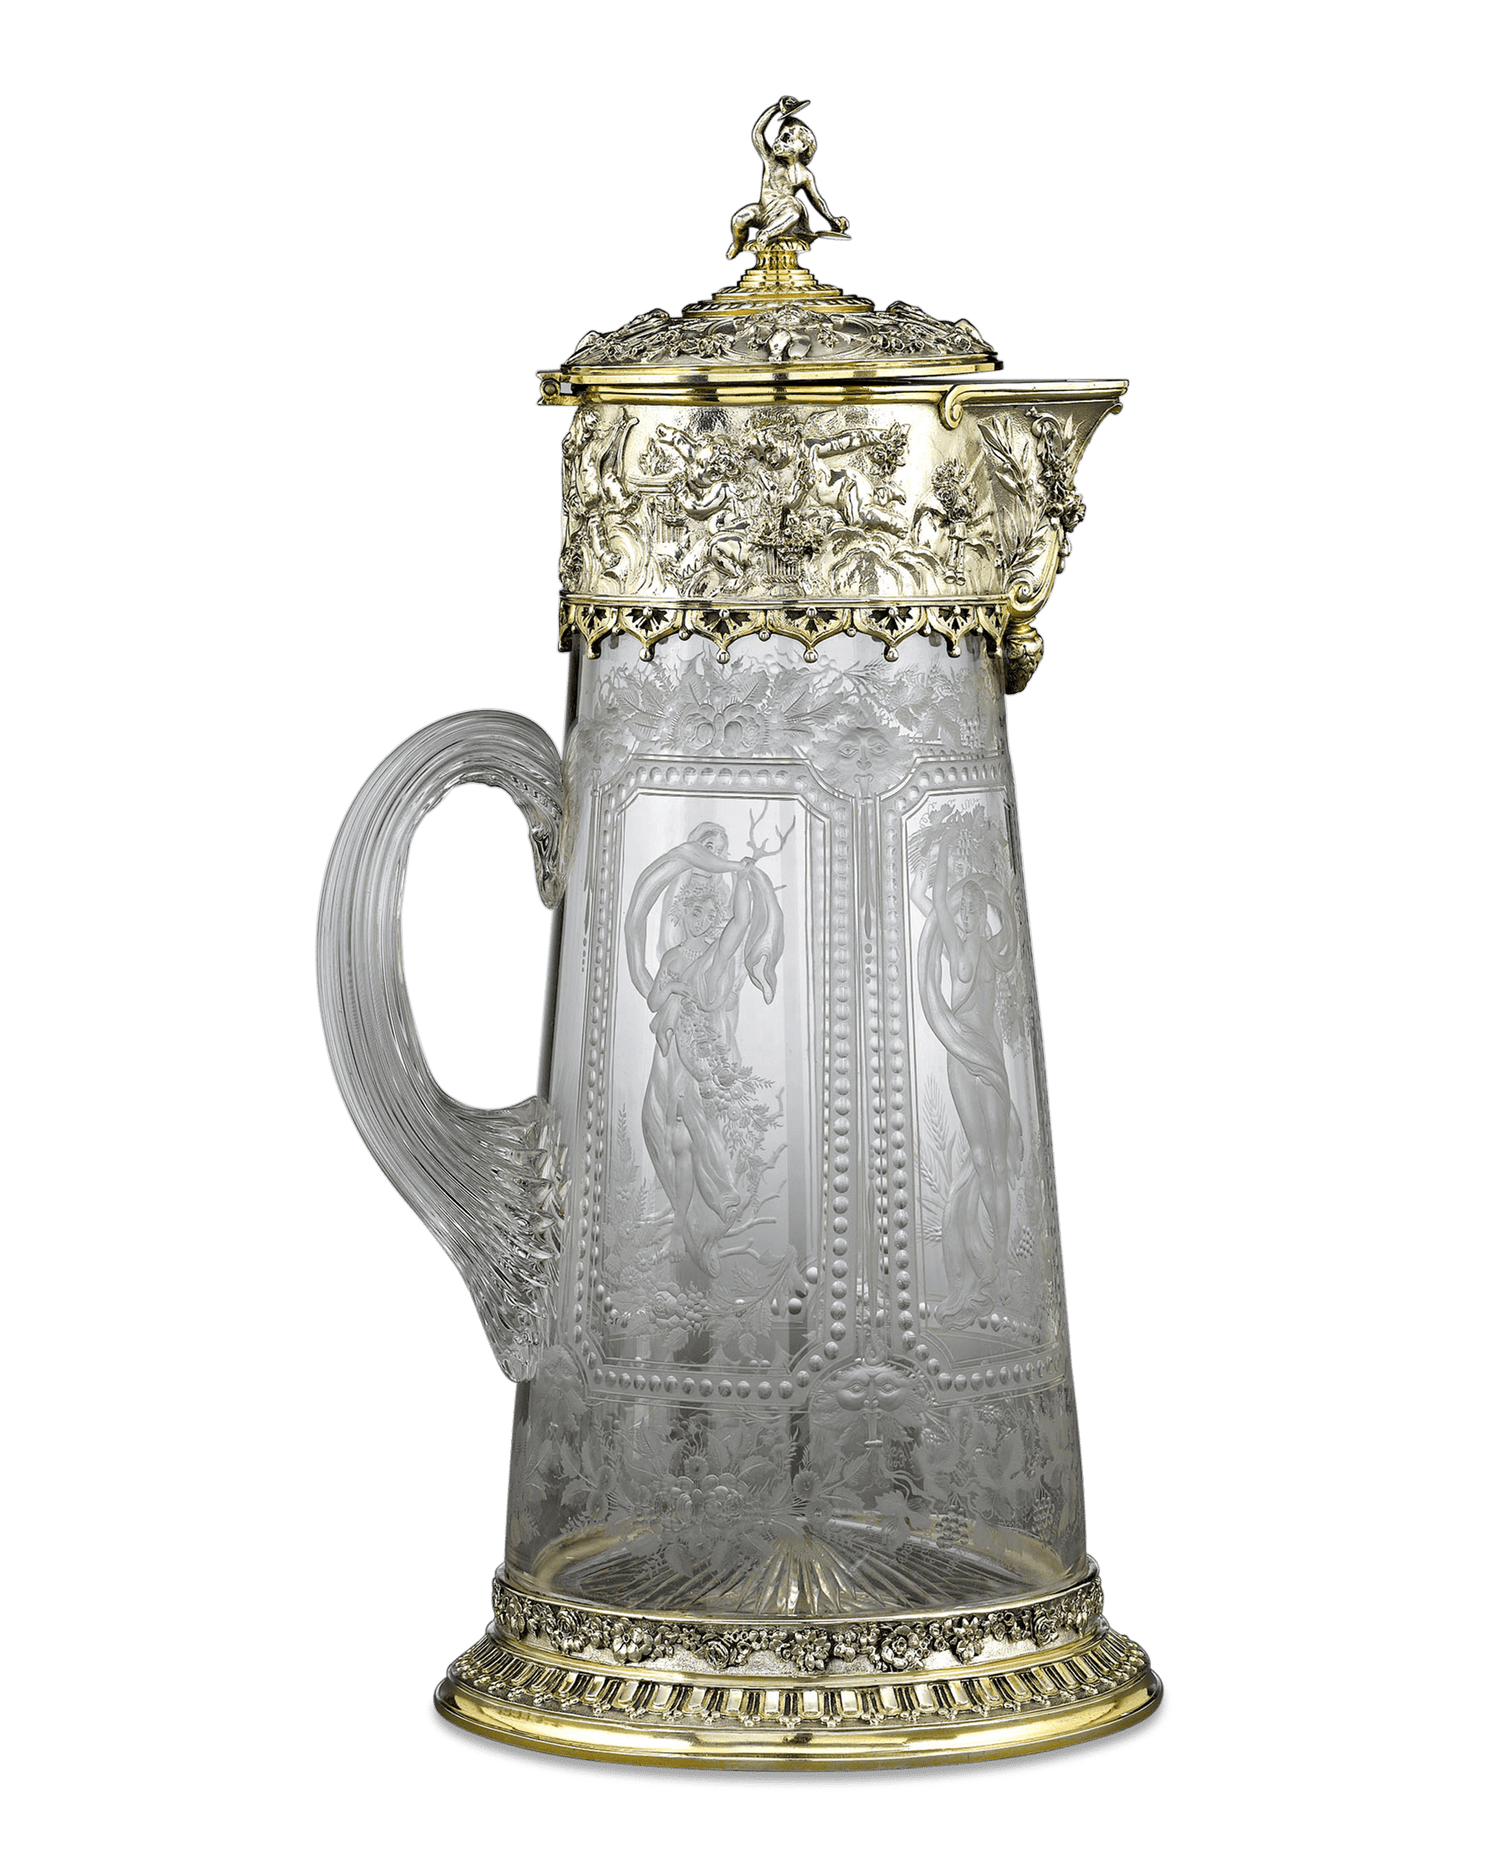 The acid-etched detailing on the pitcher echoes the incredible Baroque motif of the entire service